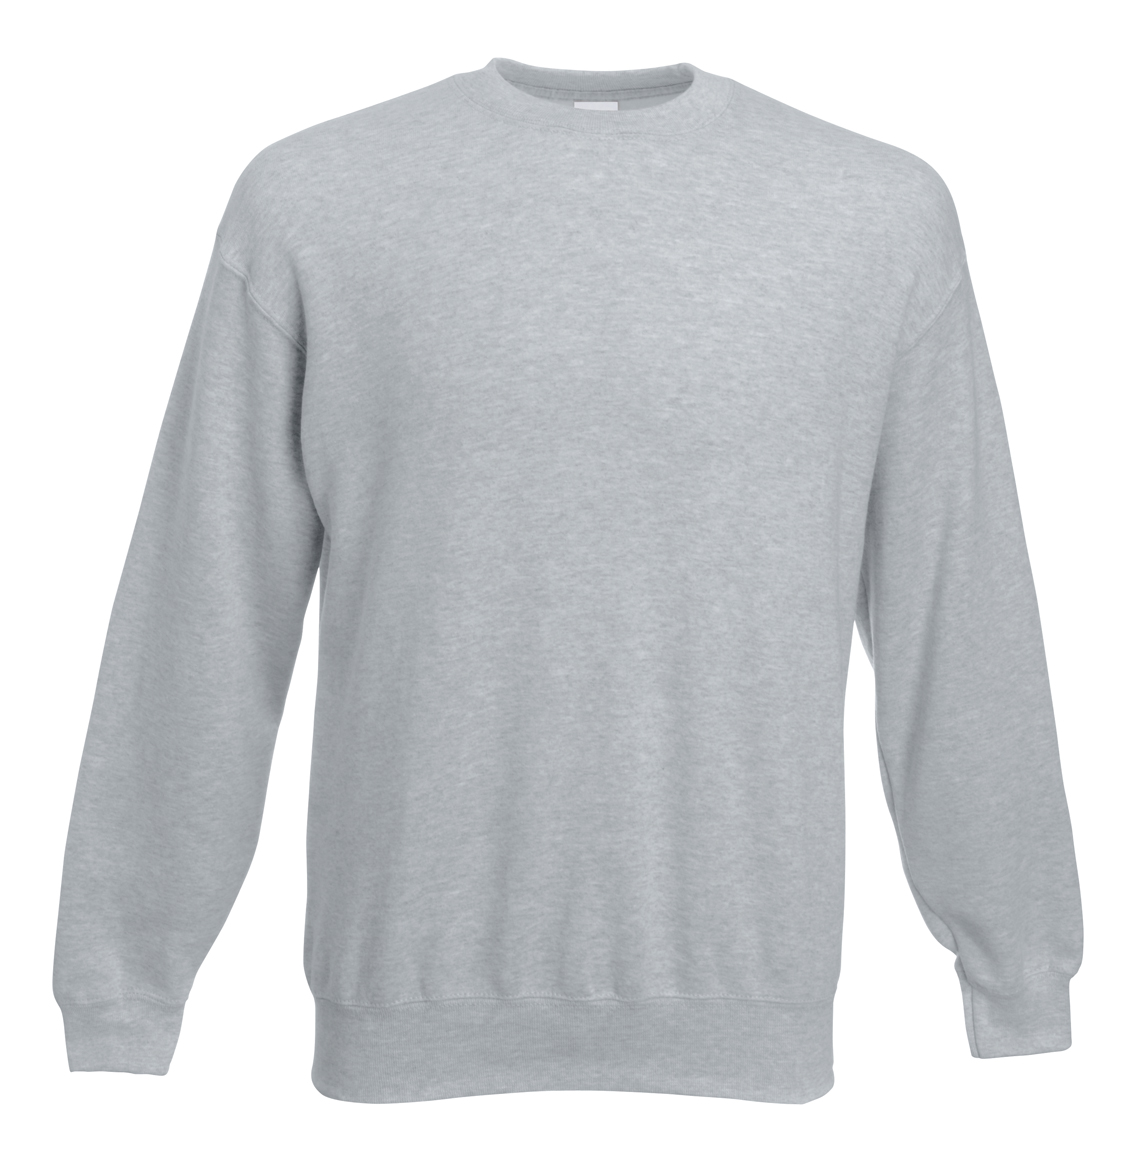 Fruit of the Loom Set-In Sweater 622020 Heather Grey